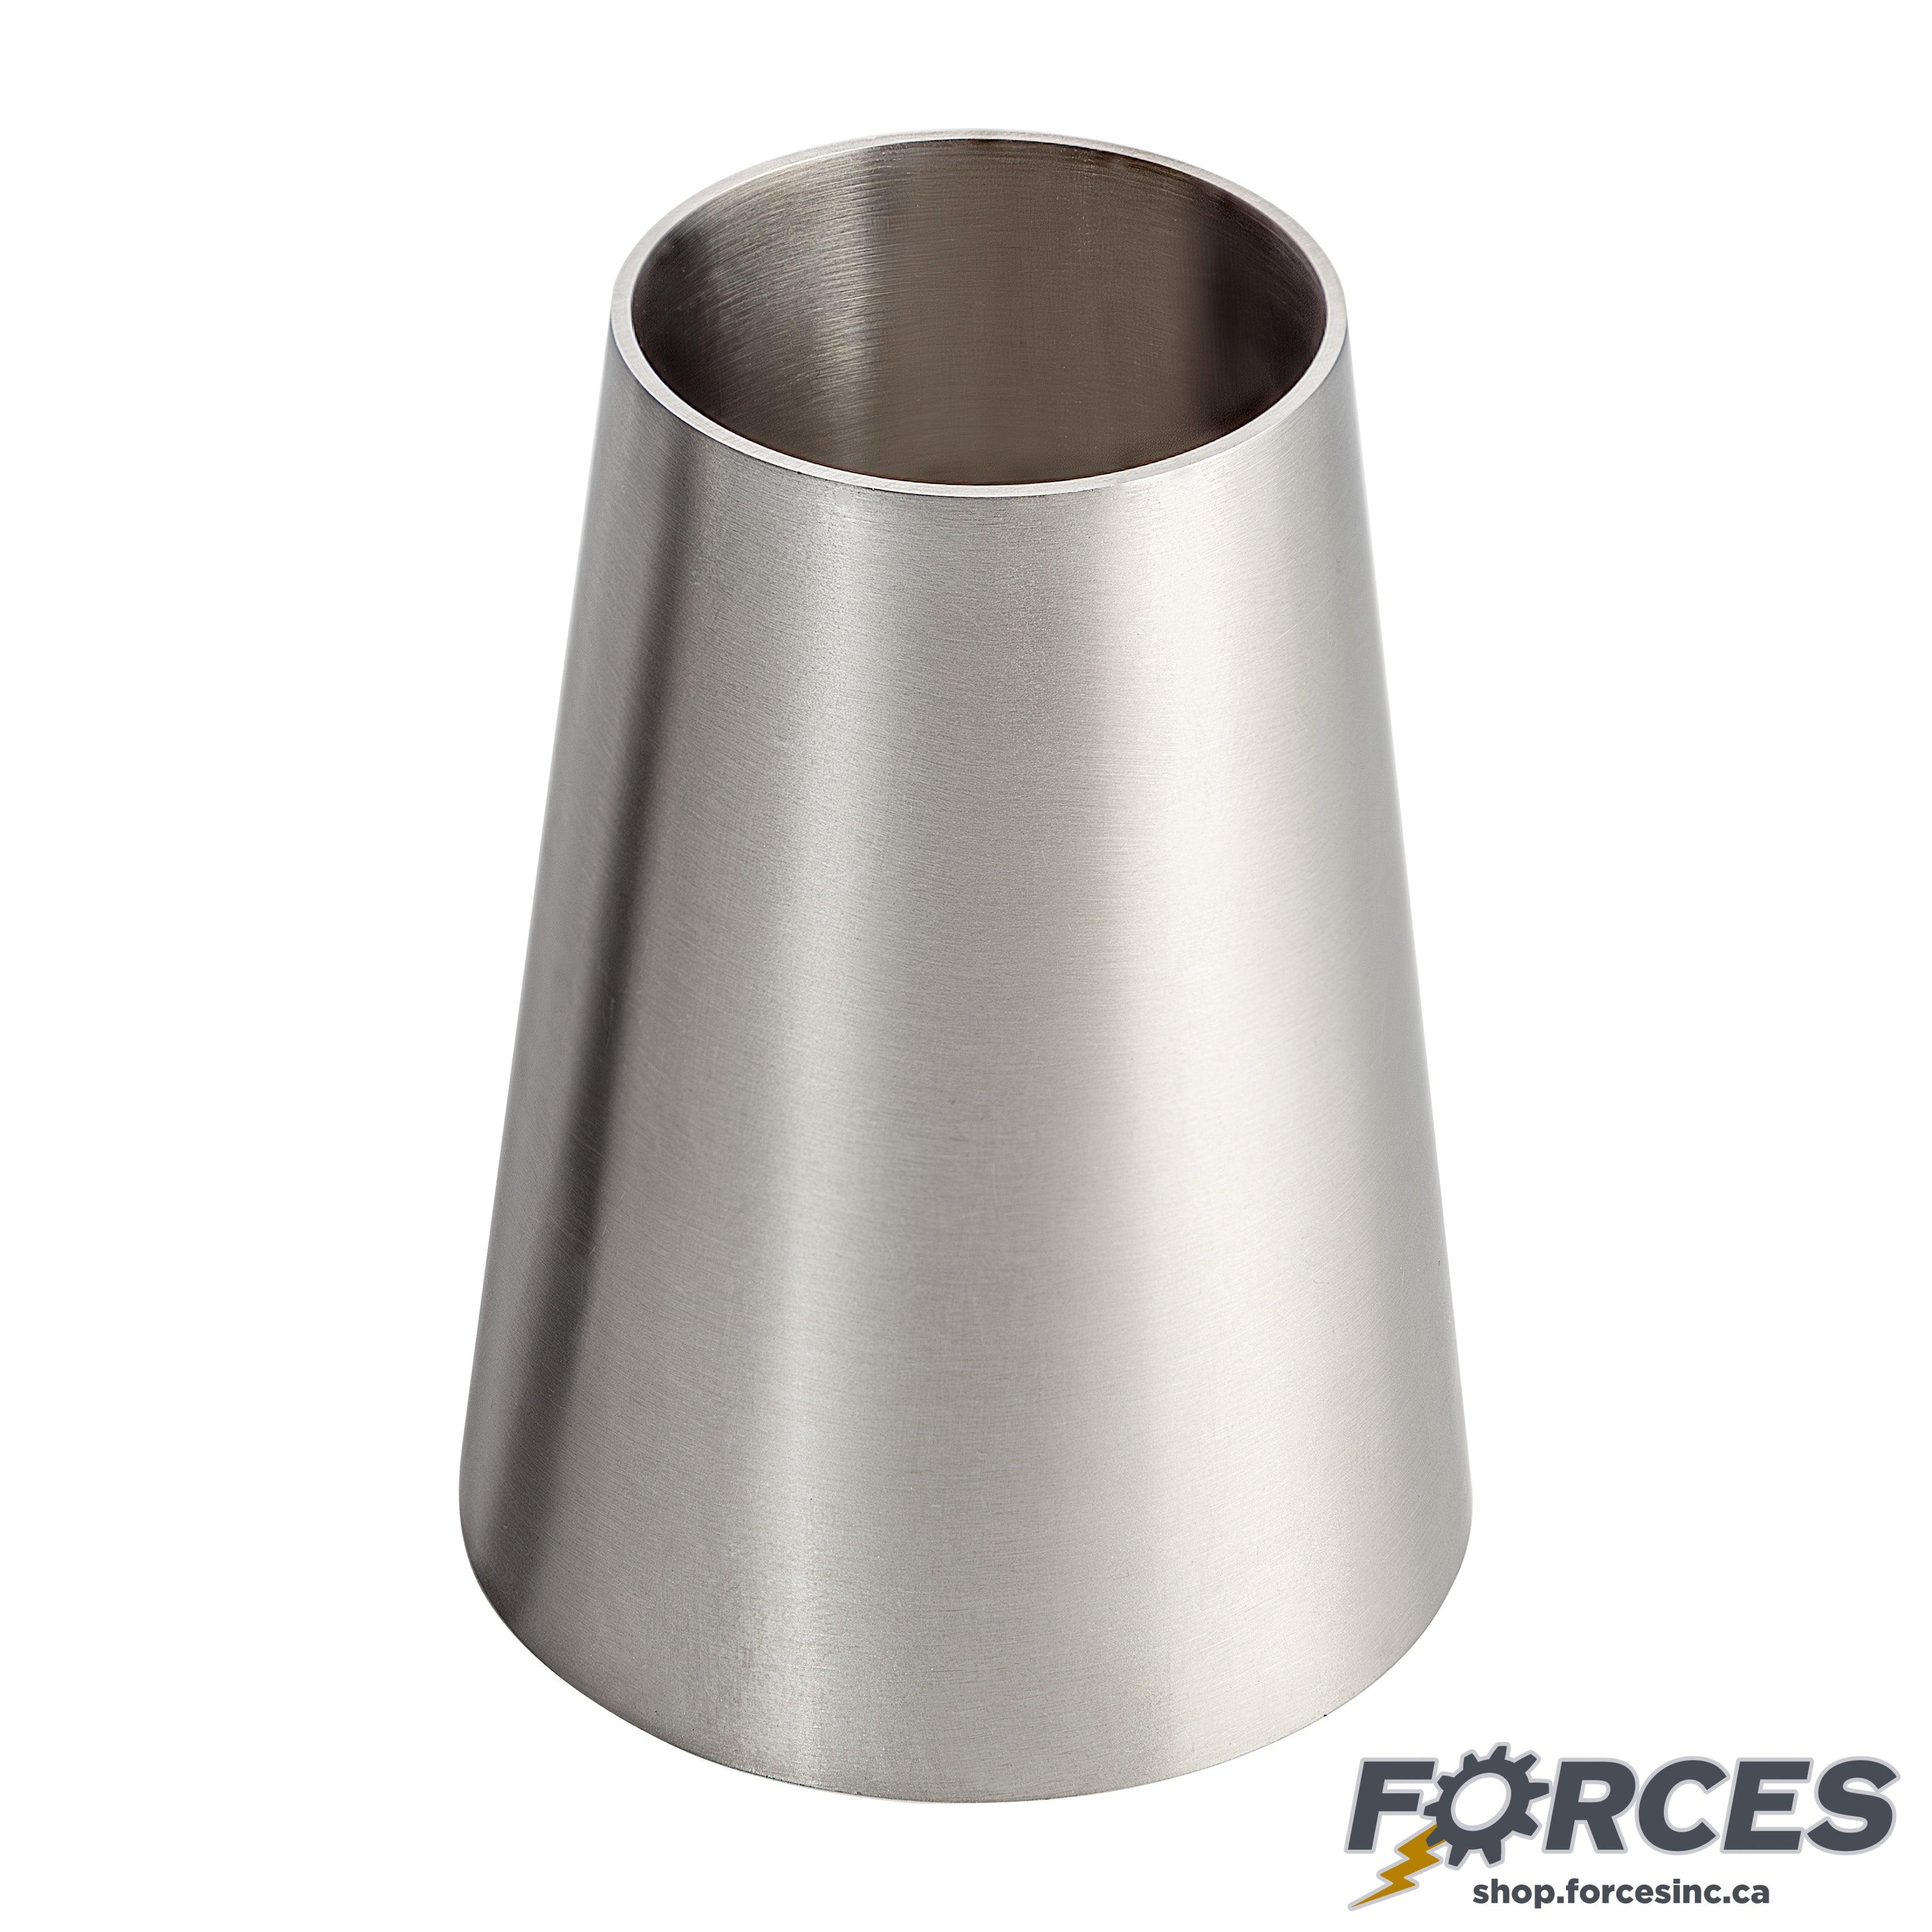 1-1/2" x 3/4" Butt Weld Concentric Reducer - Stainless Steel 316 - Forces Inc